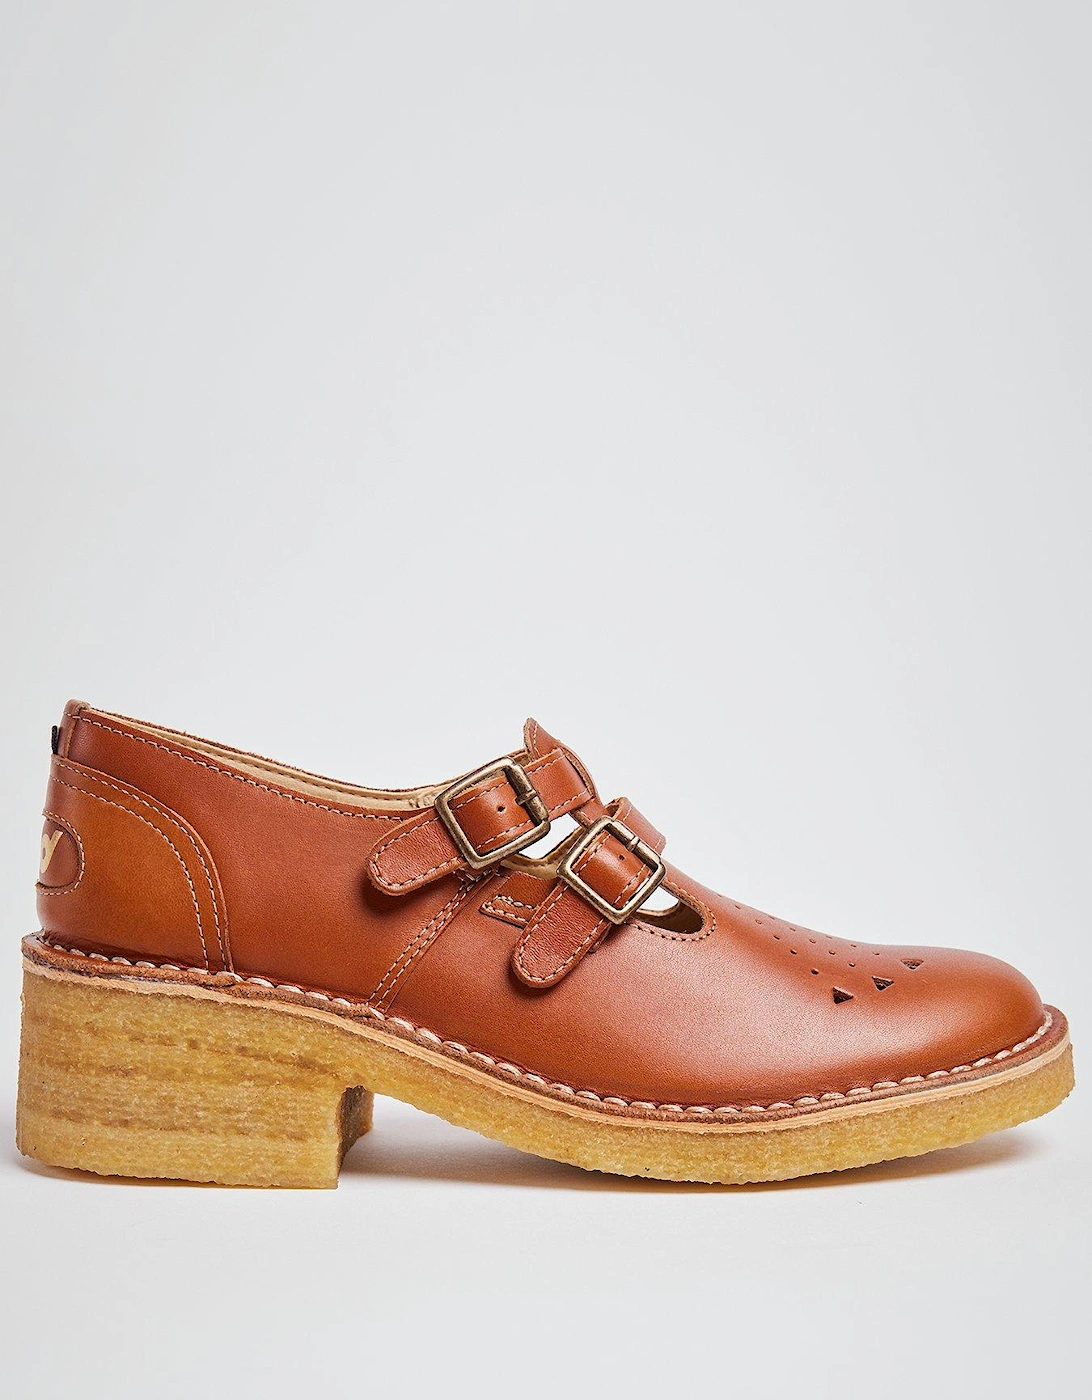 Originals Dion Leather Buckled Shoes - Tan, 2 of 1